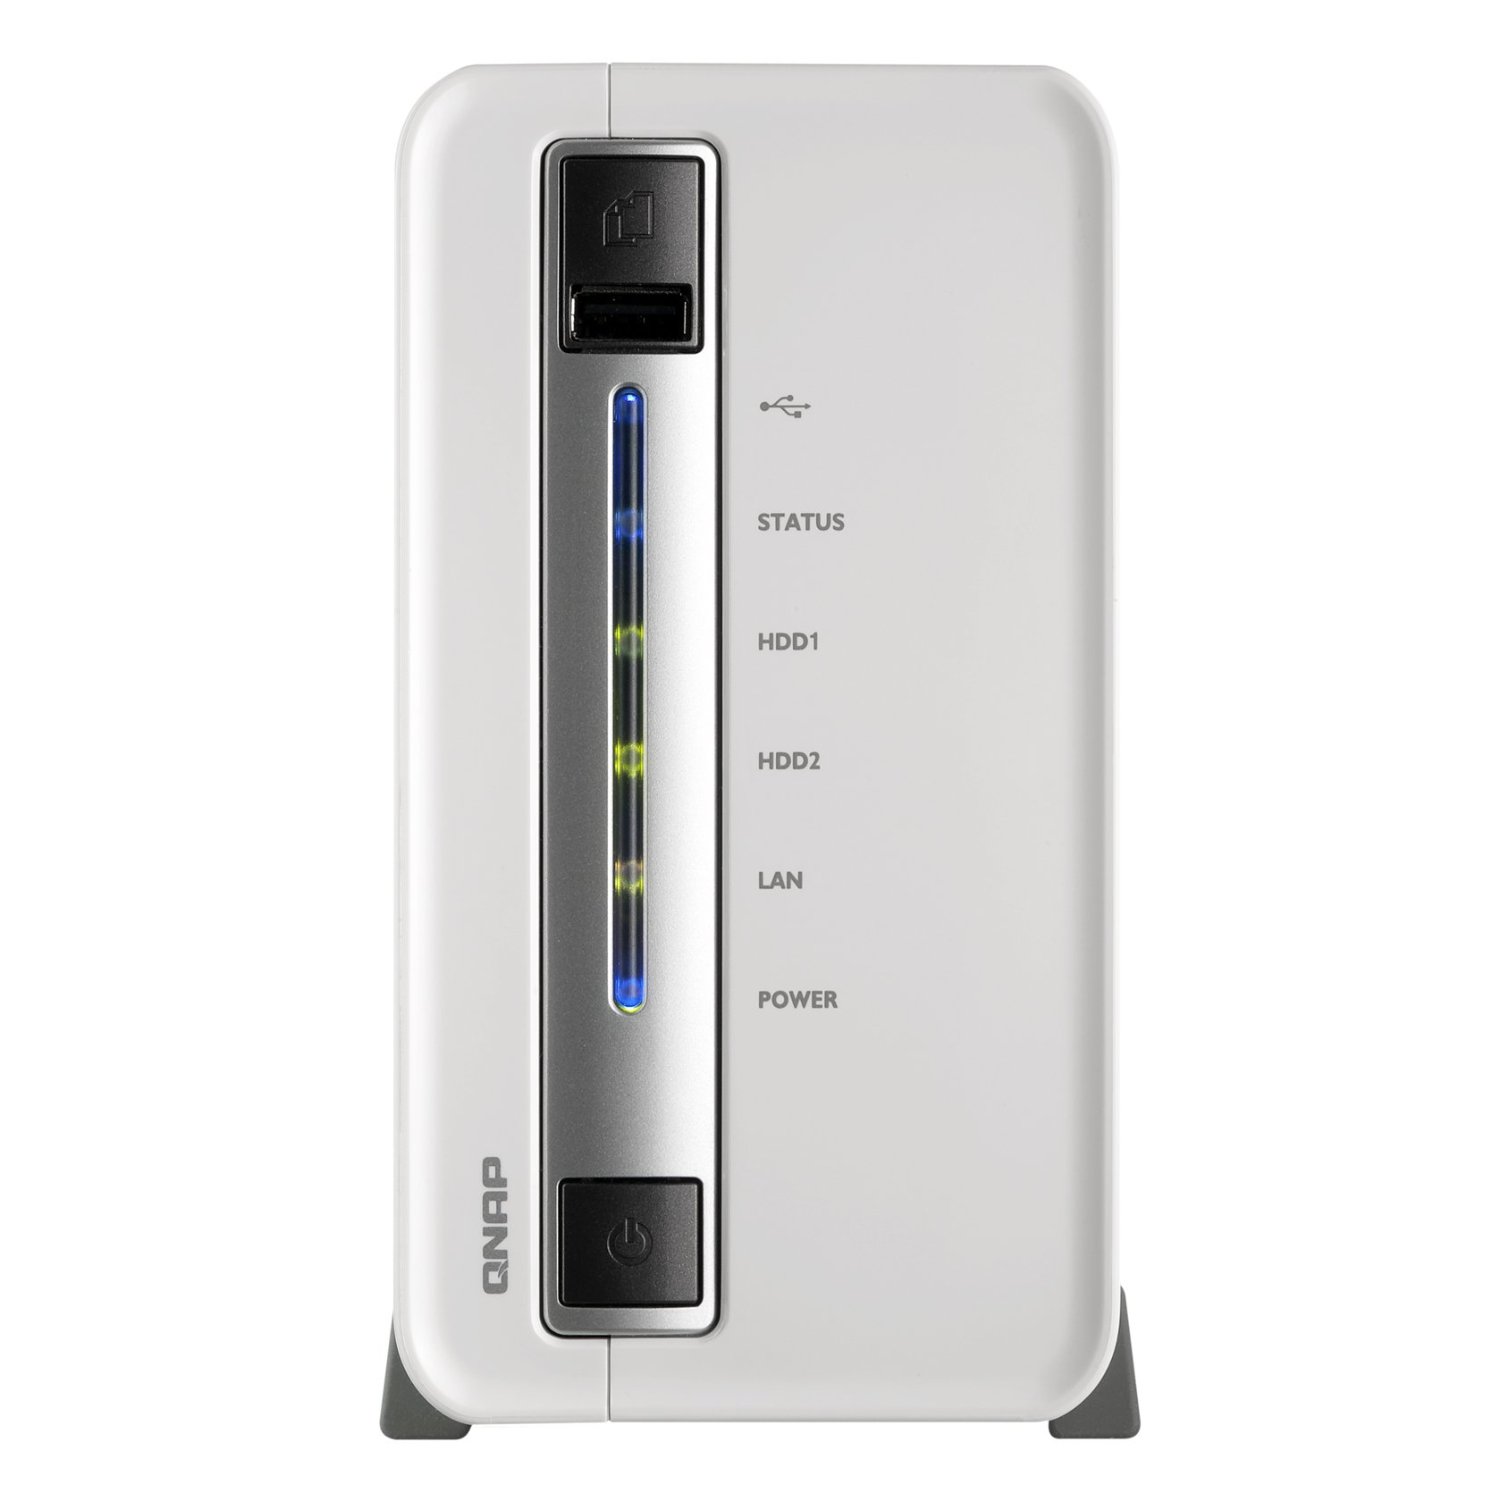 http://thetechjournal.com/wp-content/uploads/images/1110/1319020036-qnap-ts210-2bay-desktop-network-attached-storage-3.jpg